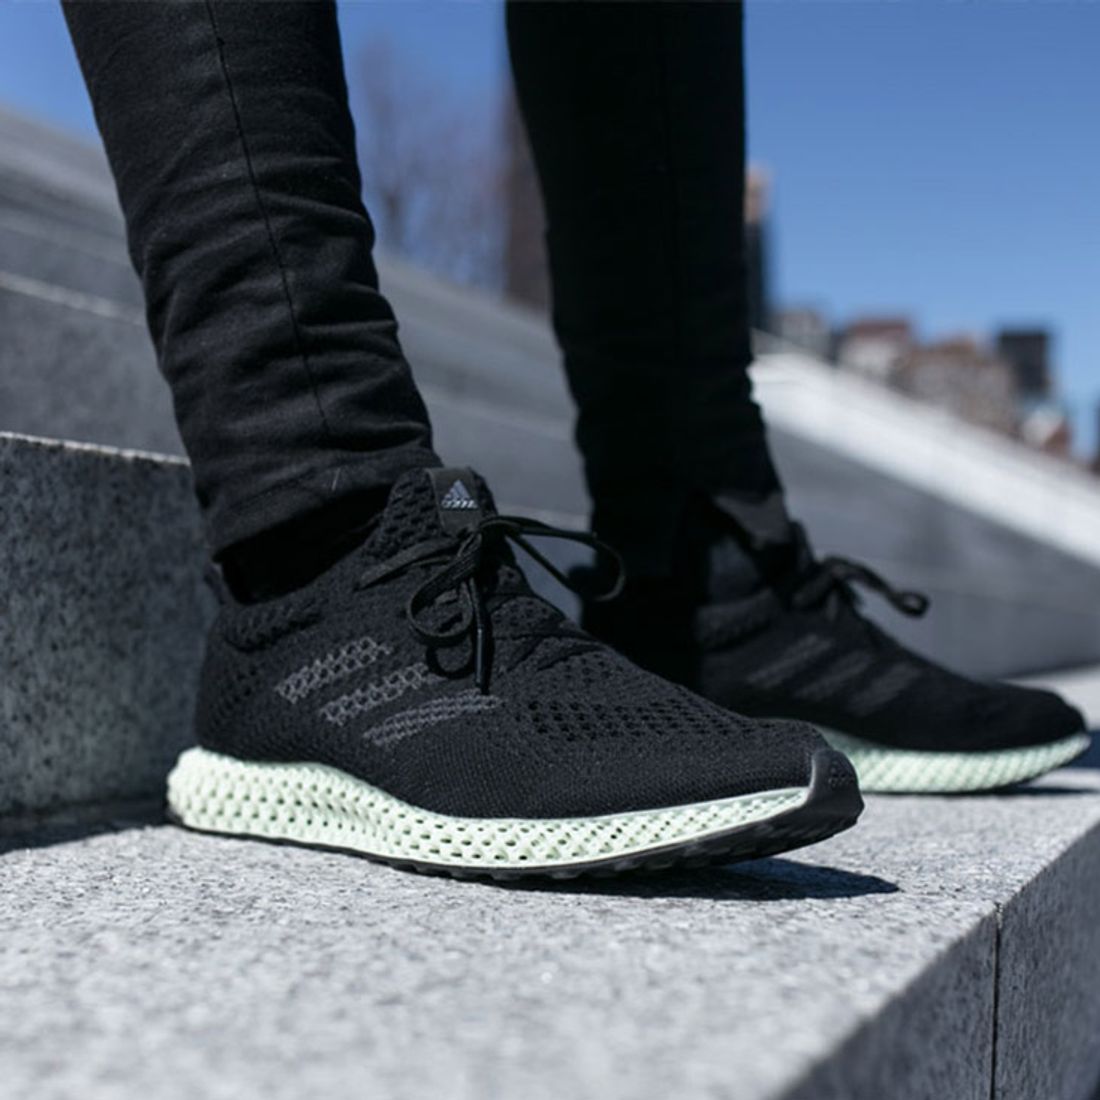 Up With The adidas Futurecraft 4d - Sneaker Freaker